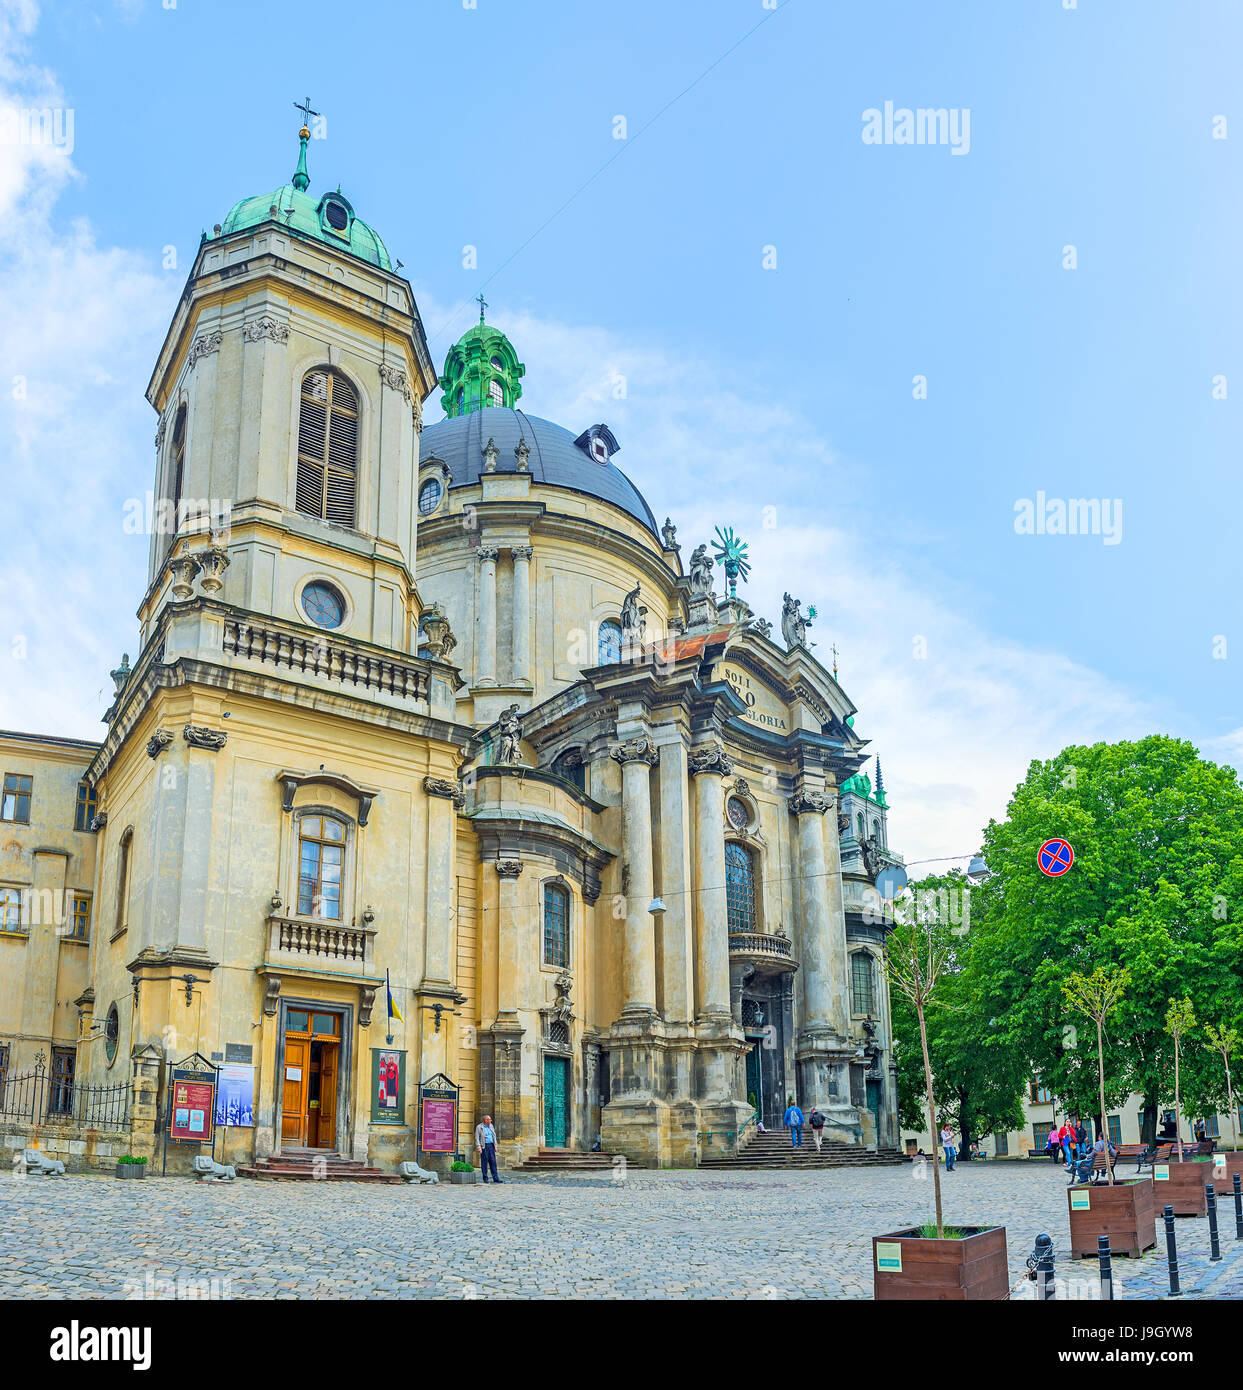 LVOV, UKRAINE - MAY 16, 2017: Impressive facade of Dominican church (Holy Eucharist) with huge bell tower and dome, tall columns t the entrance, on Ma Stock Photo